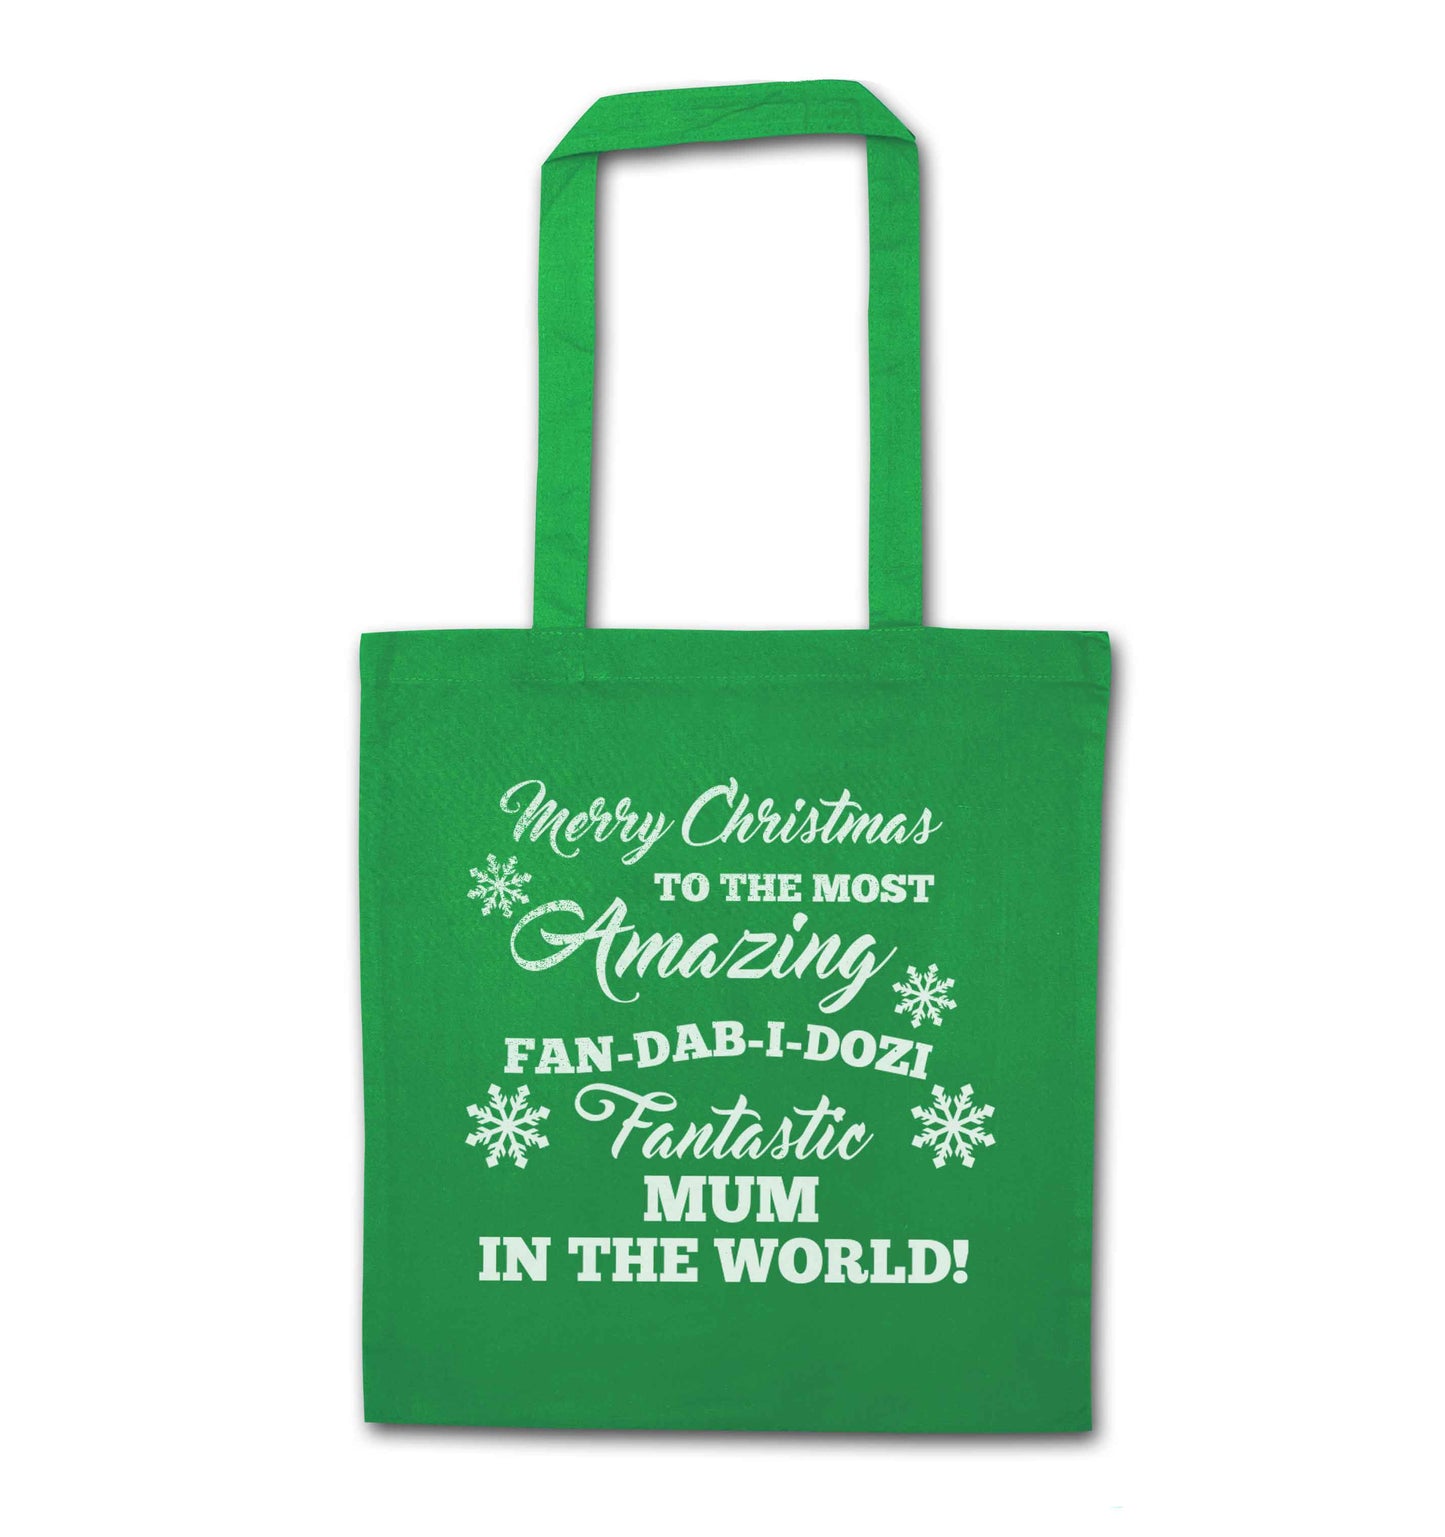 Merry Christmas to the most amazing fan-dab-i-dozi fantasic mum in the world green tote bag